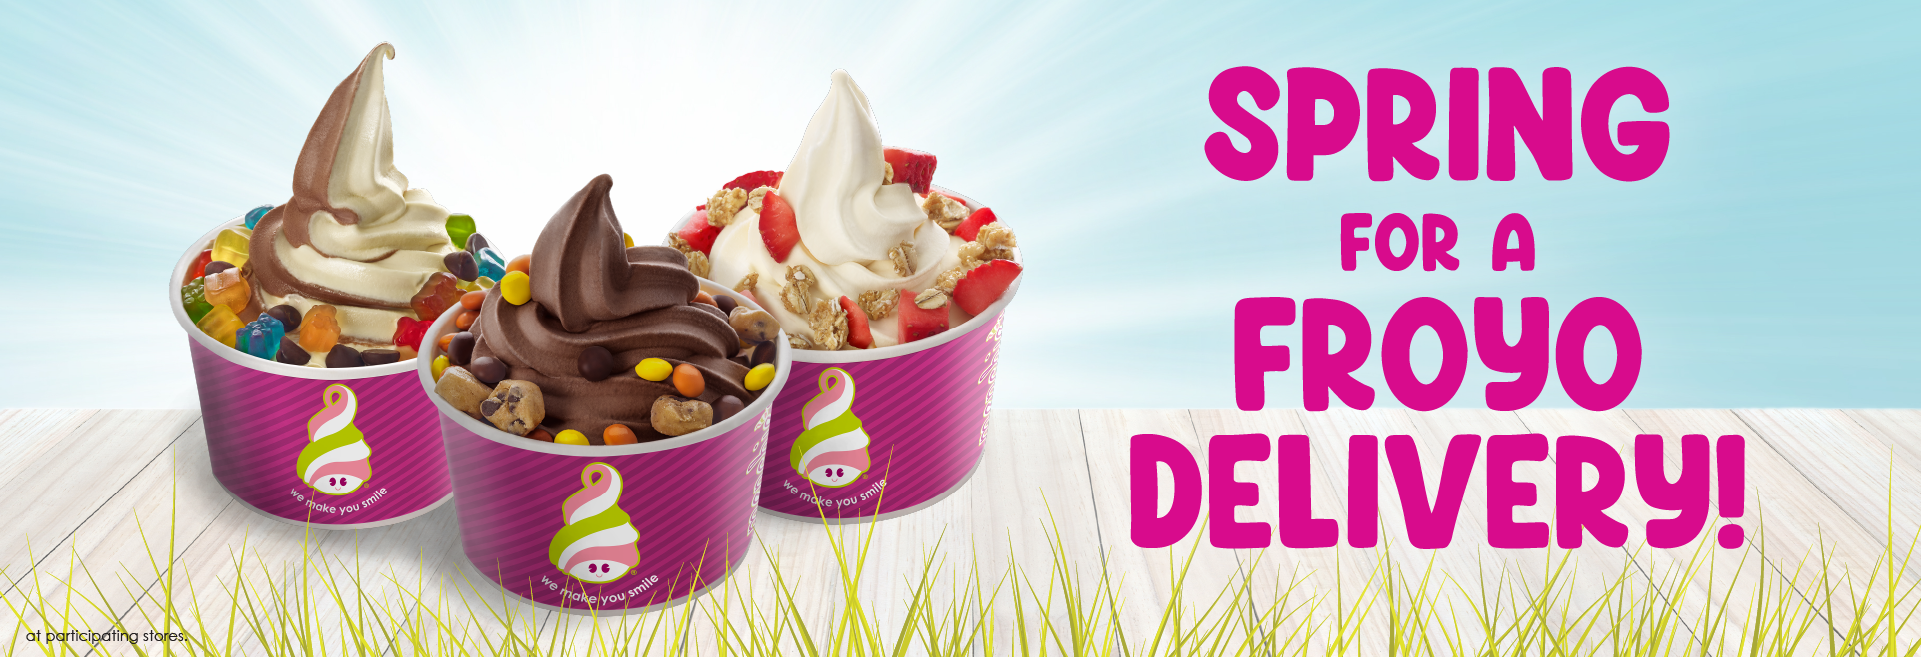 Anytime is a great time for a Menchie’s delivery!